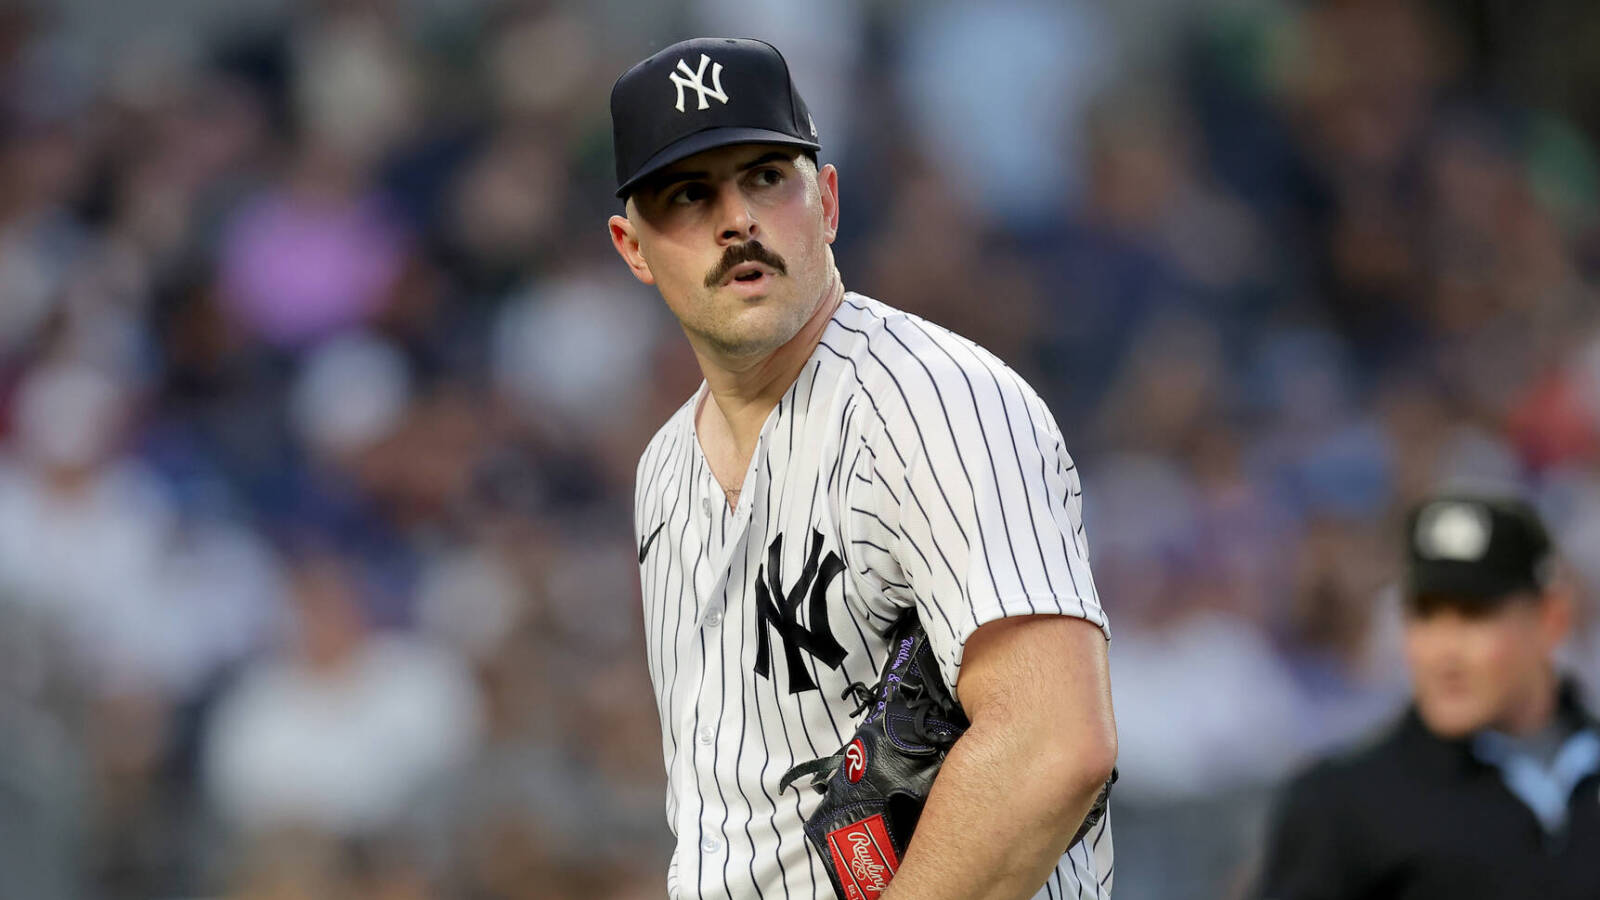 Yankees' Carlos Rodon working to 'suck less' after controversy